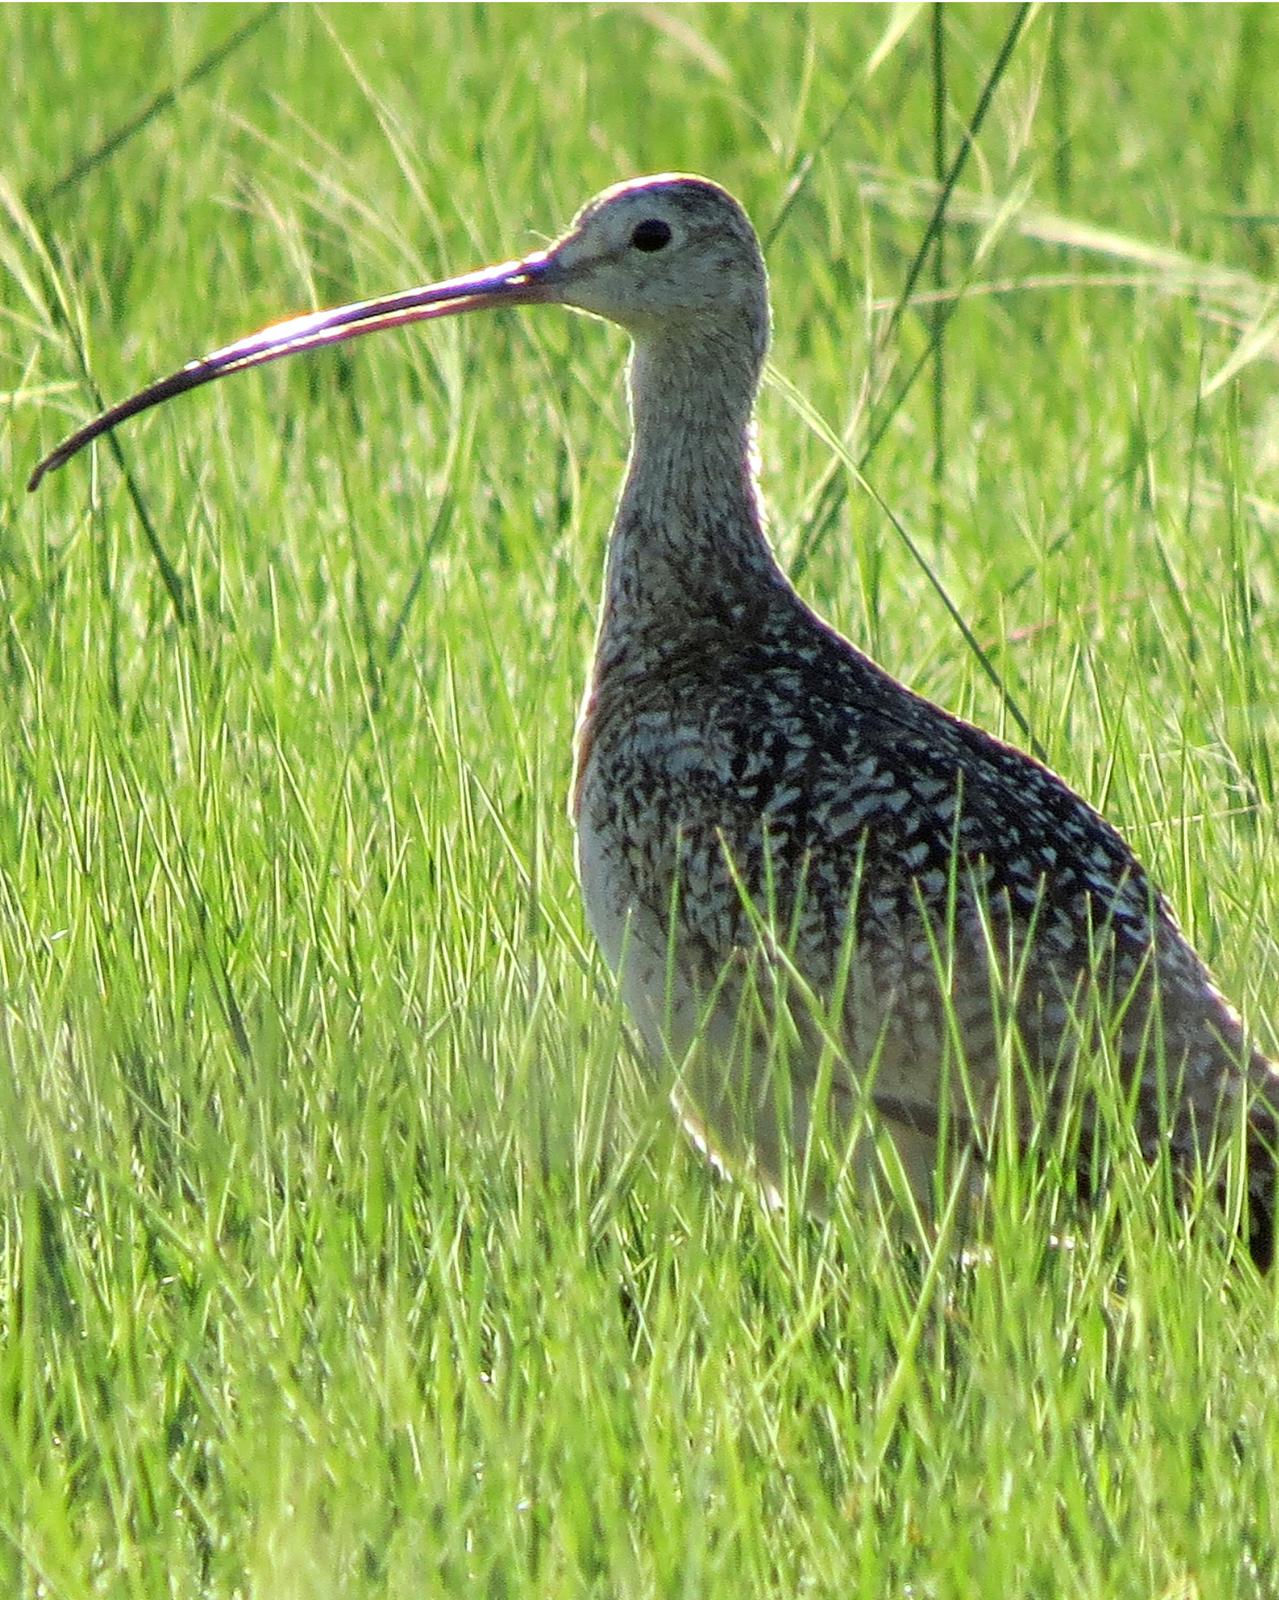 Long-billed Curlew Photo by Kelly Preheim